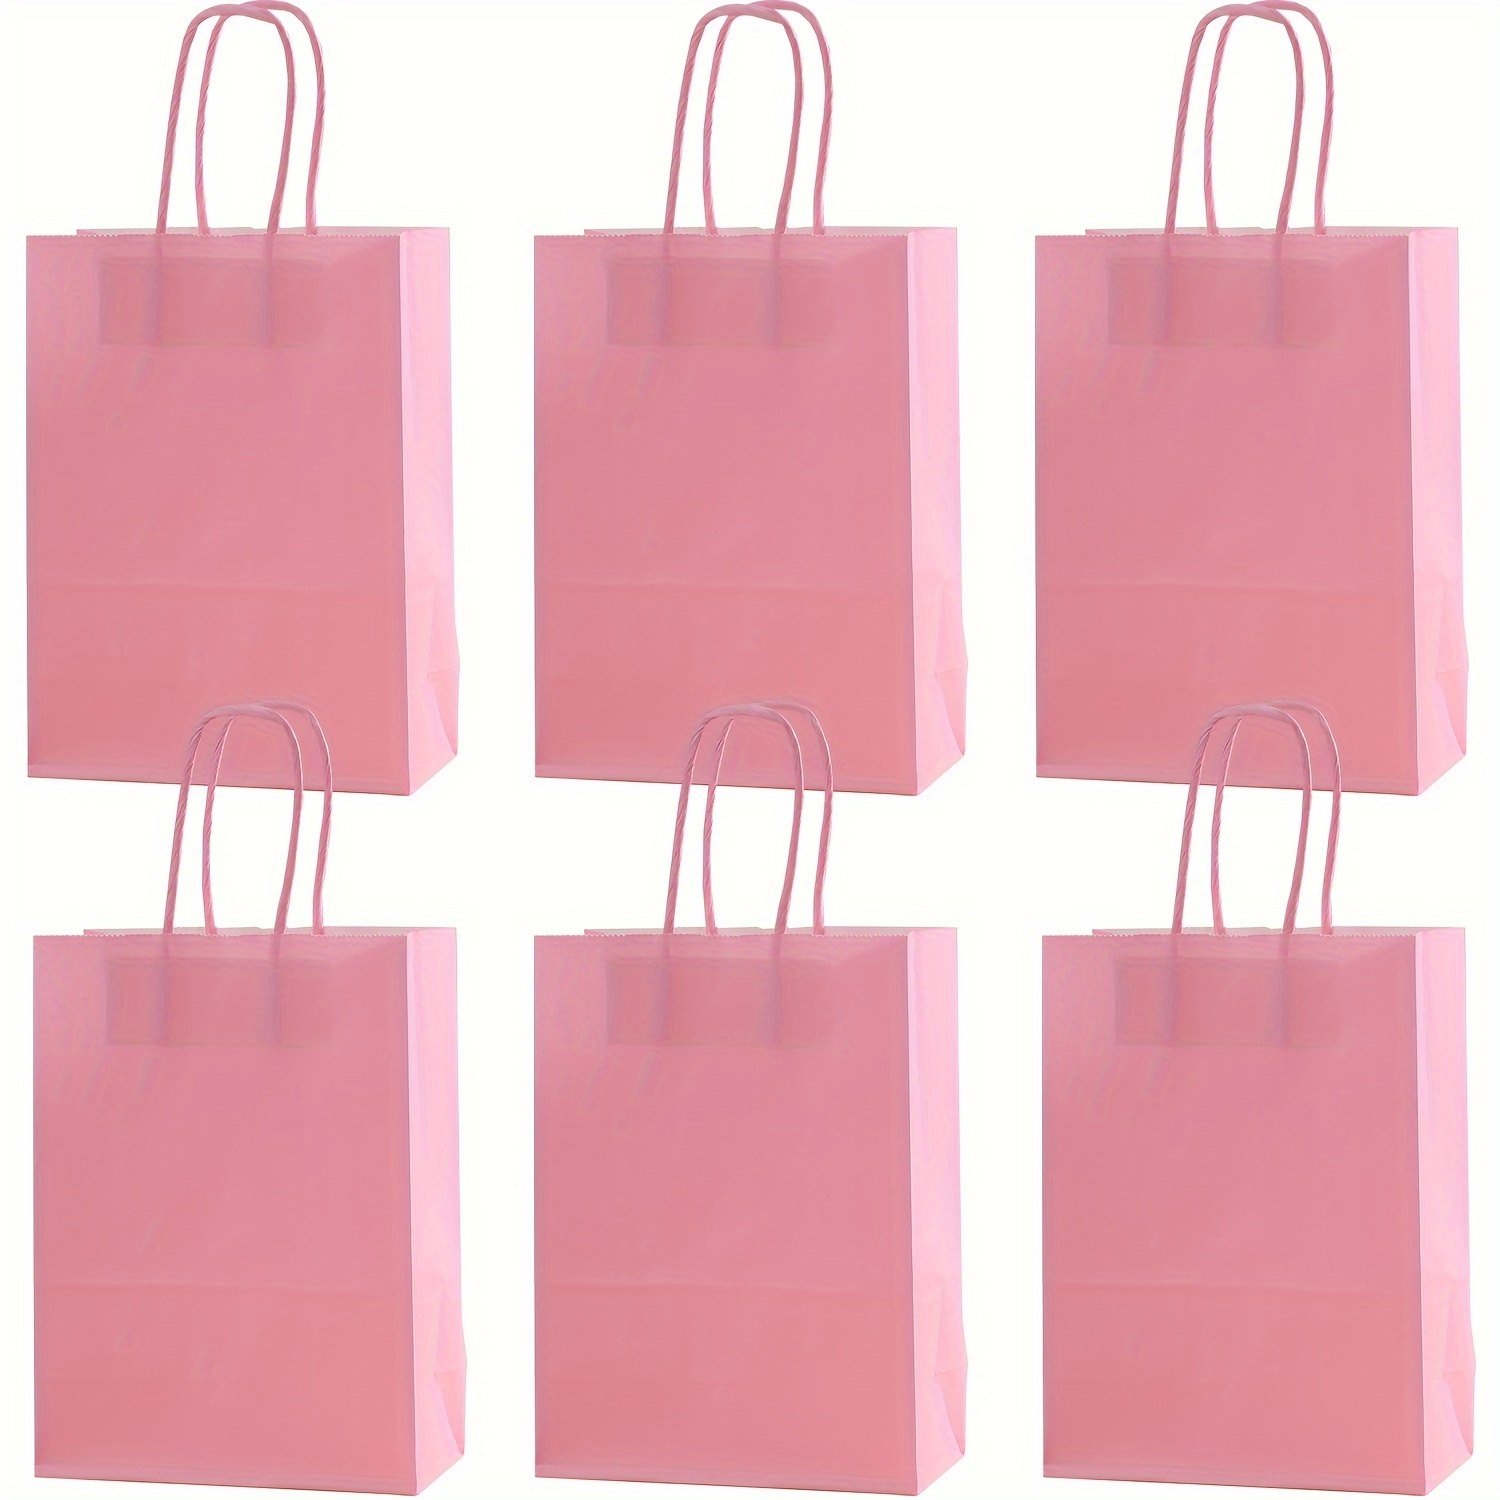 

6-piece Pink Kraft Paper Bags 16x22x8cm - Foldable, Perfect For Takeout, Shopping, Parties, Birthdays, Weddings & More